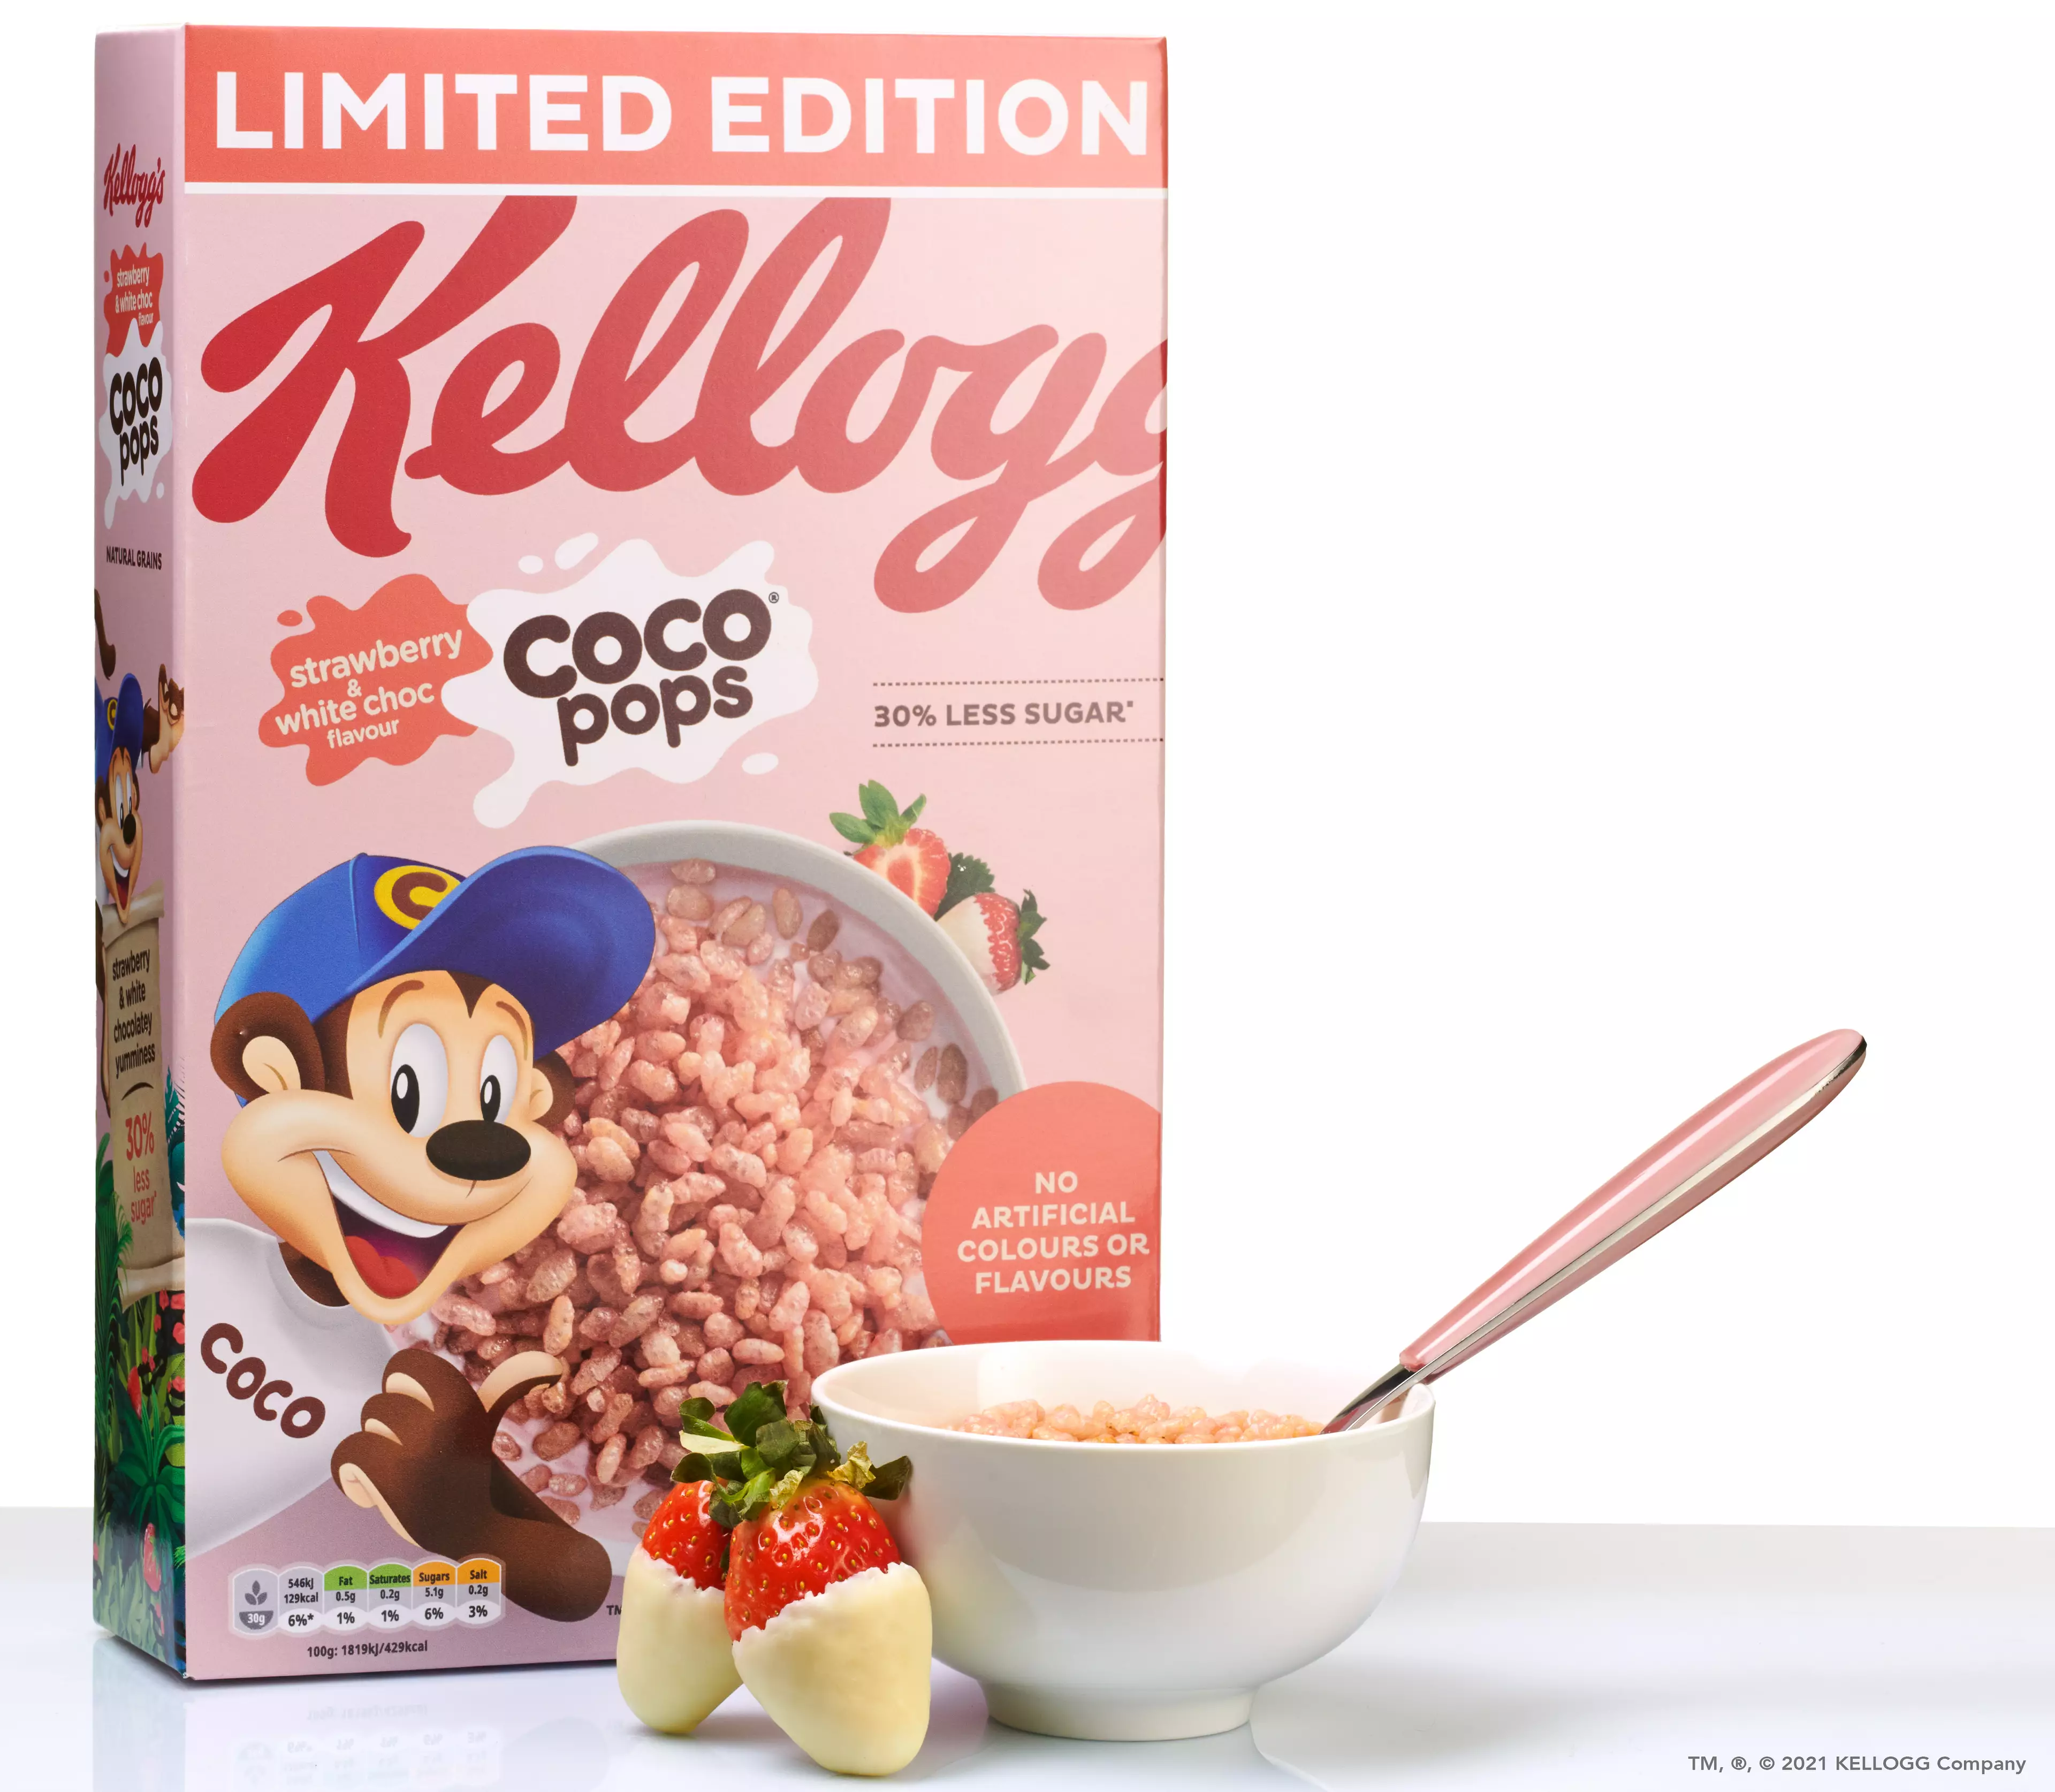 The crispy cereal combines creamy white chocolate with juicy strawberries (